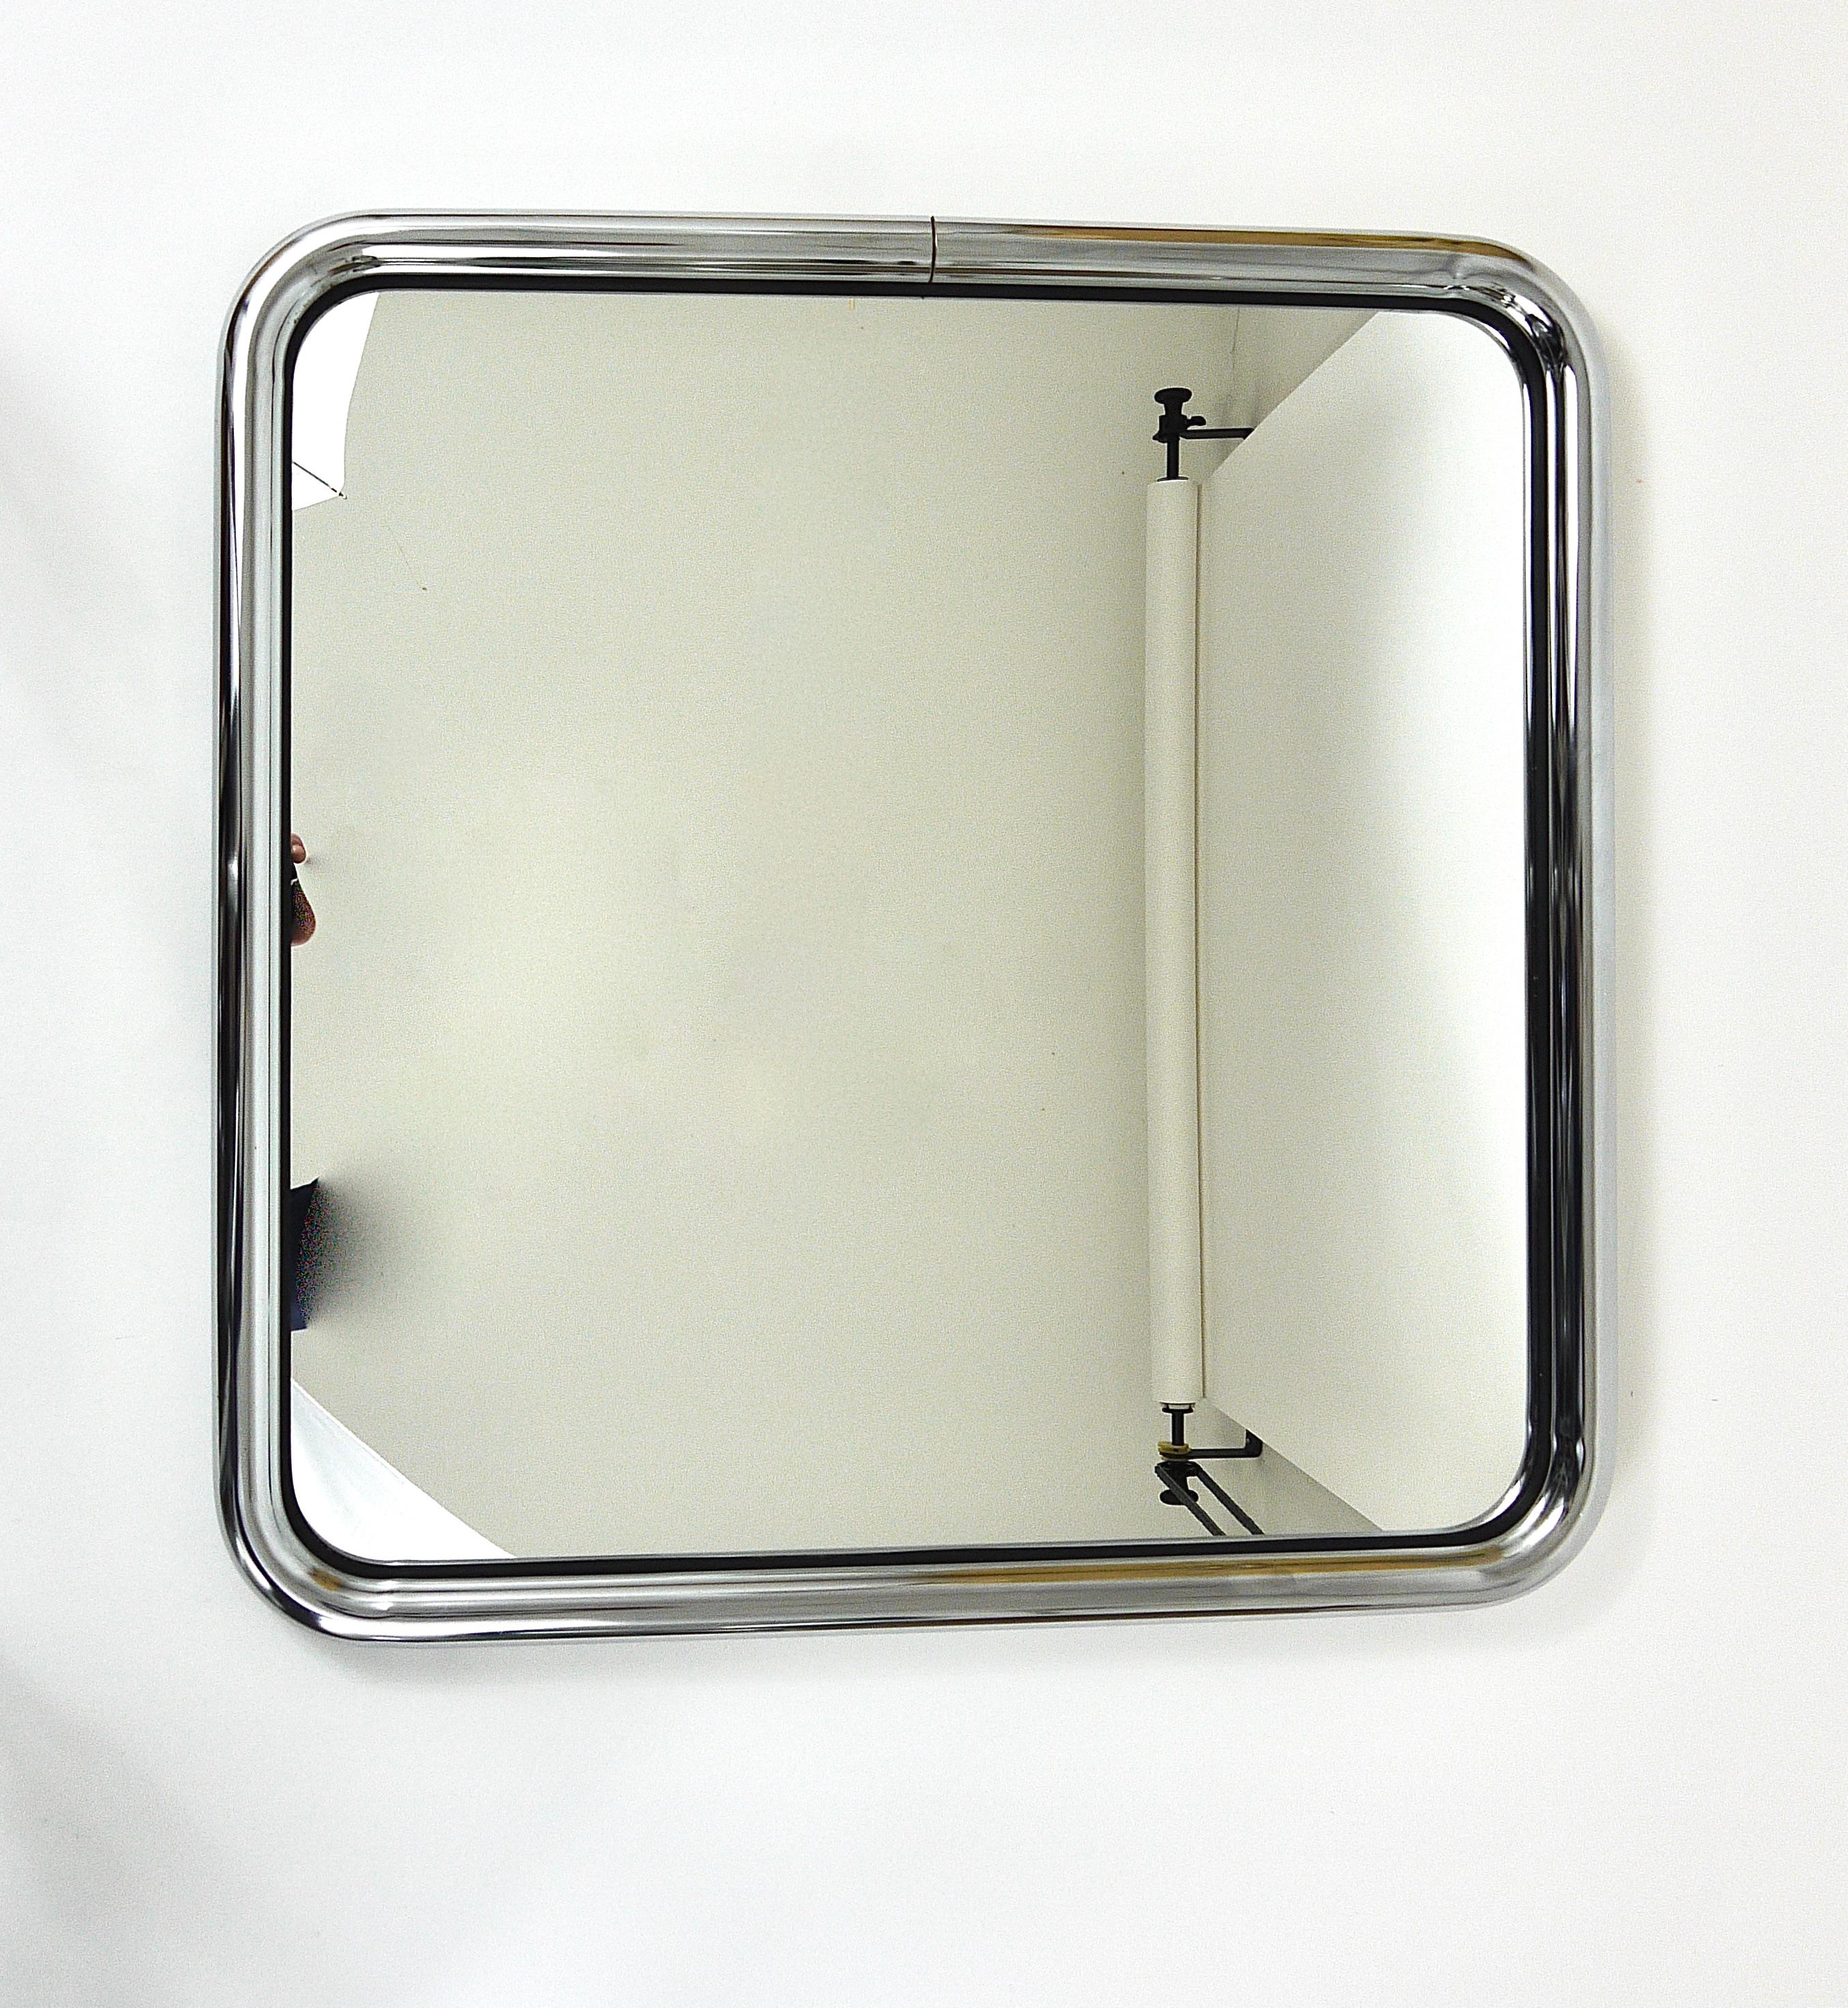 Metal Post-Modern Square Chromed Tubular Steel Wall Mirror from the 1970s